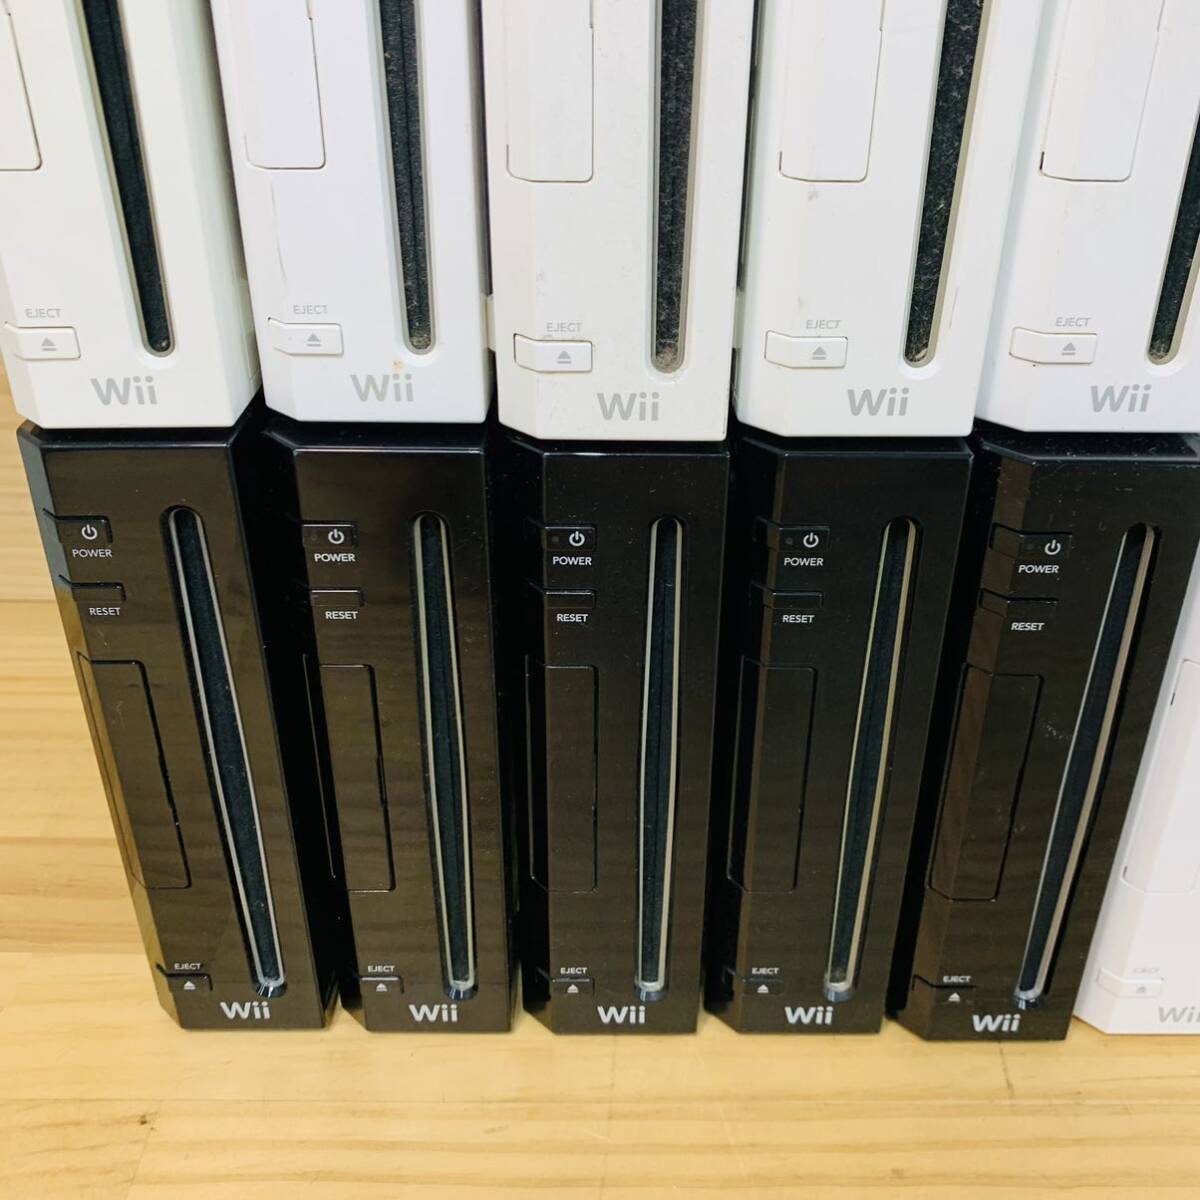 AAG38529 まとめ売り ジャンク品 Wii 本体 20台セット_画像4